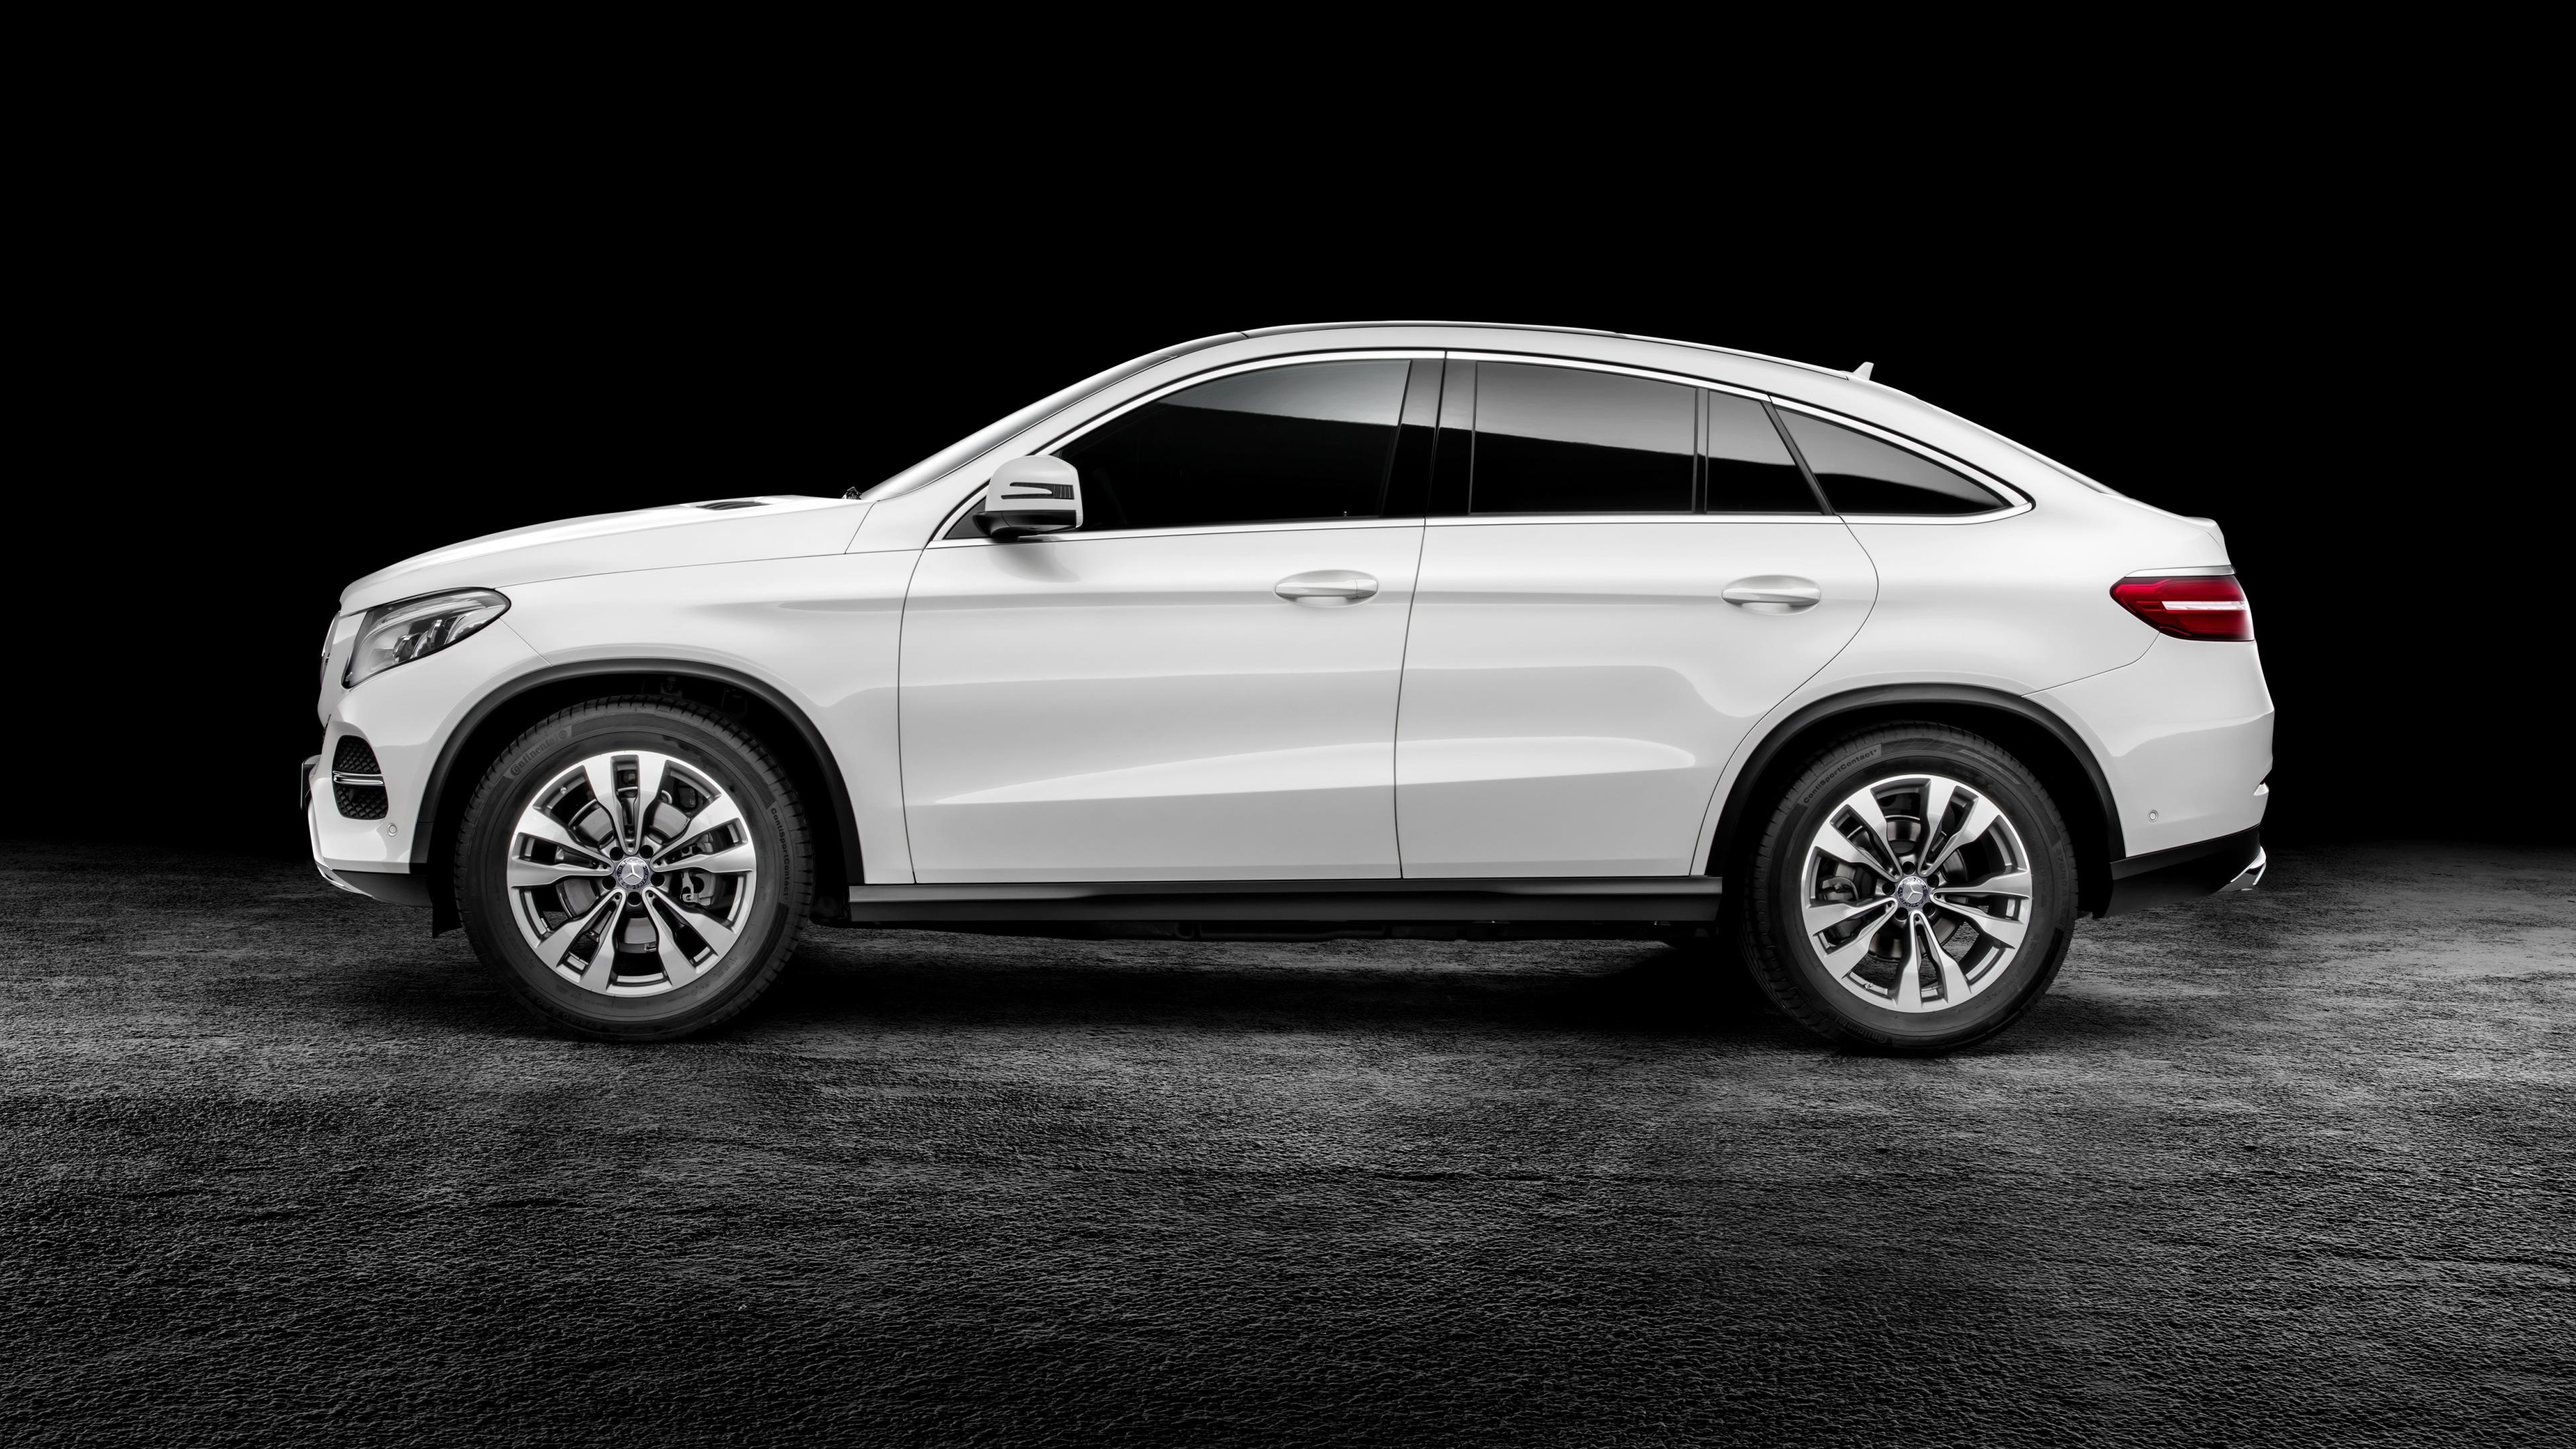 Mercedes-Benz GLE, Coupe excellence, Stylish and elegant, Luxury in motion, 3840x2160 4K Desktop